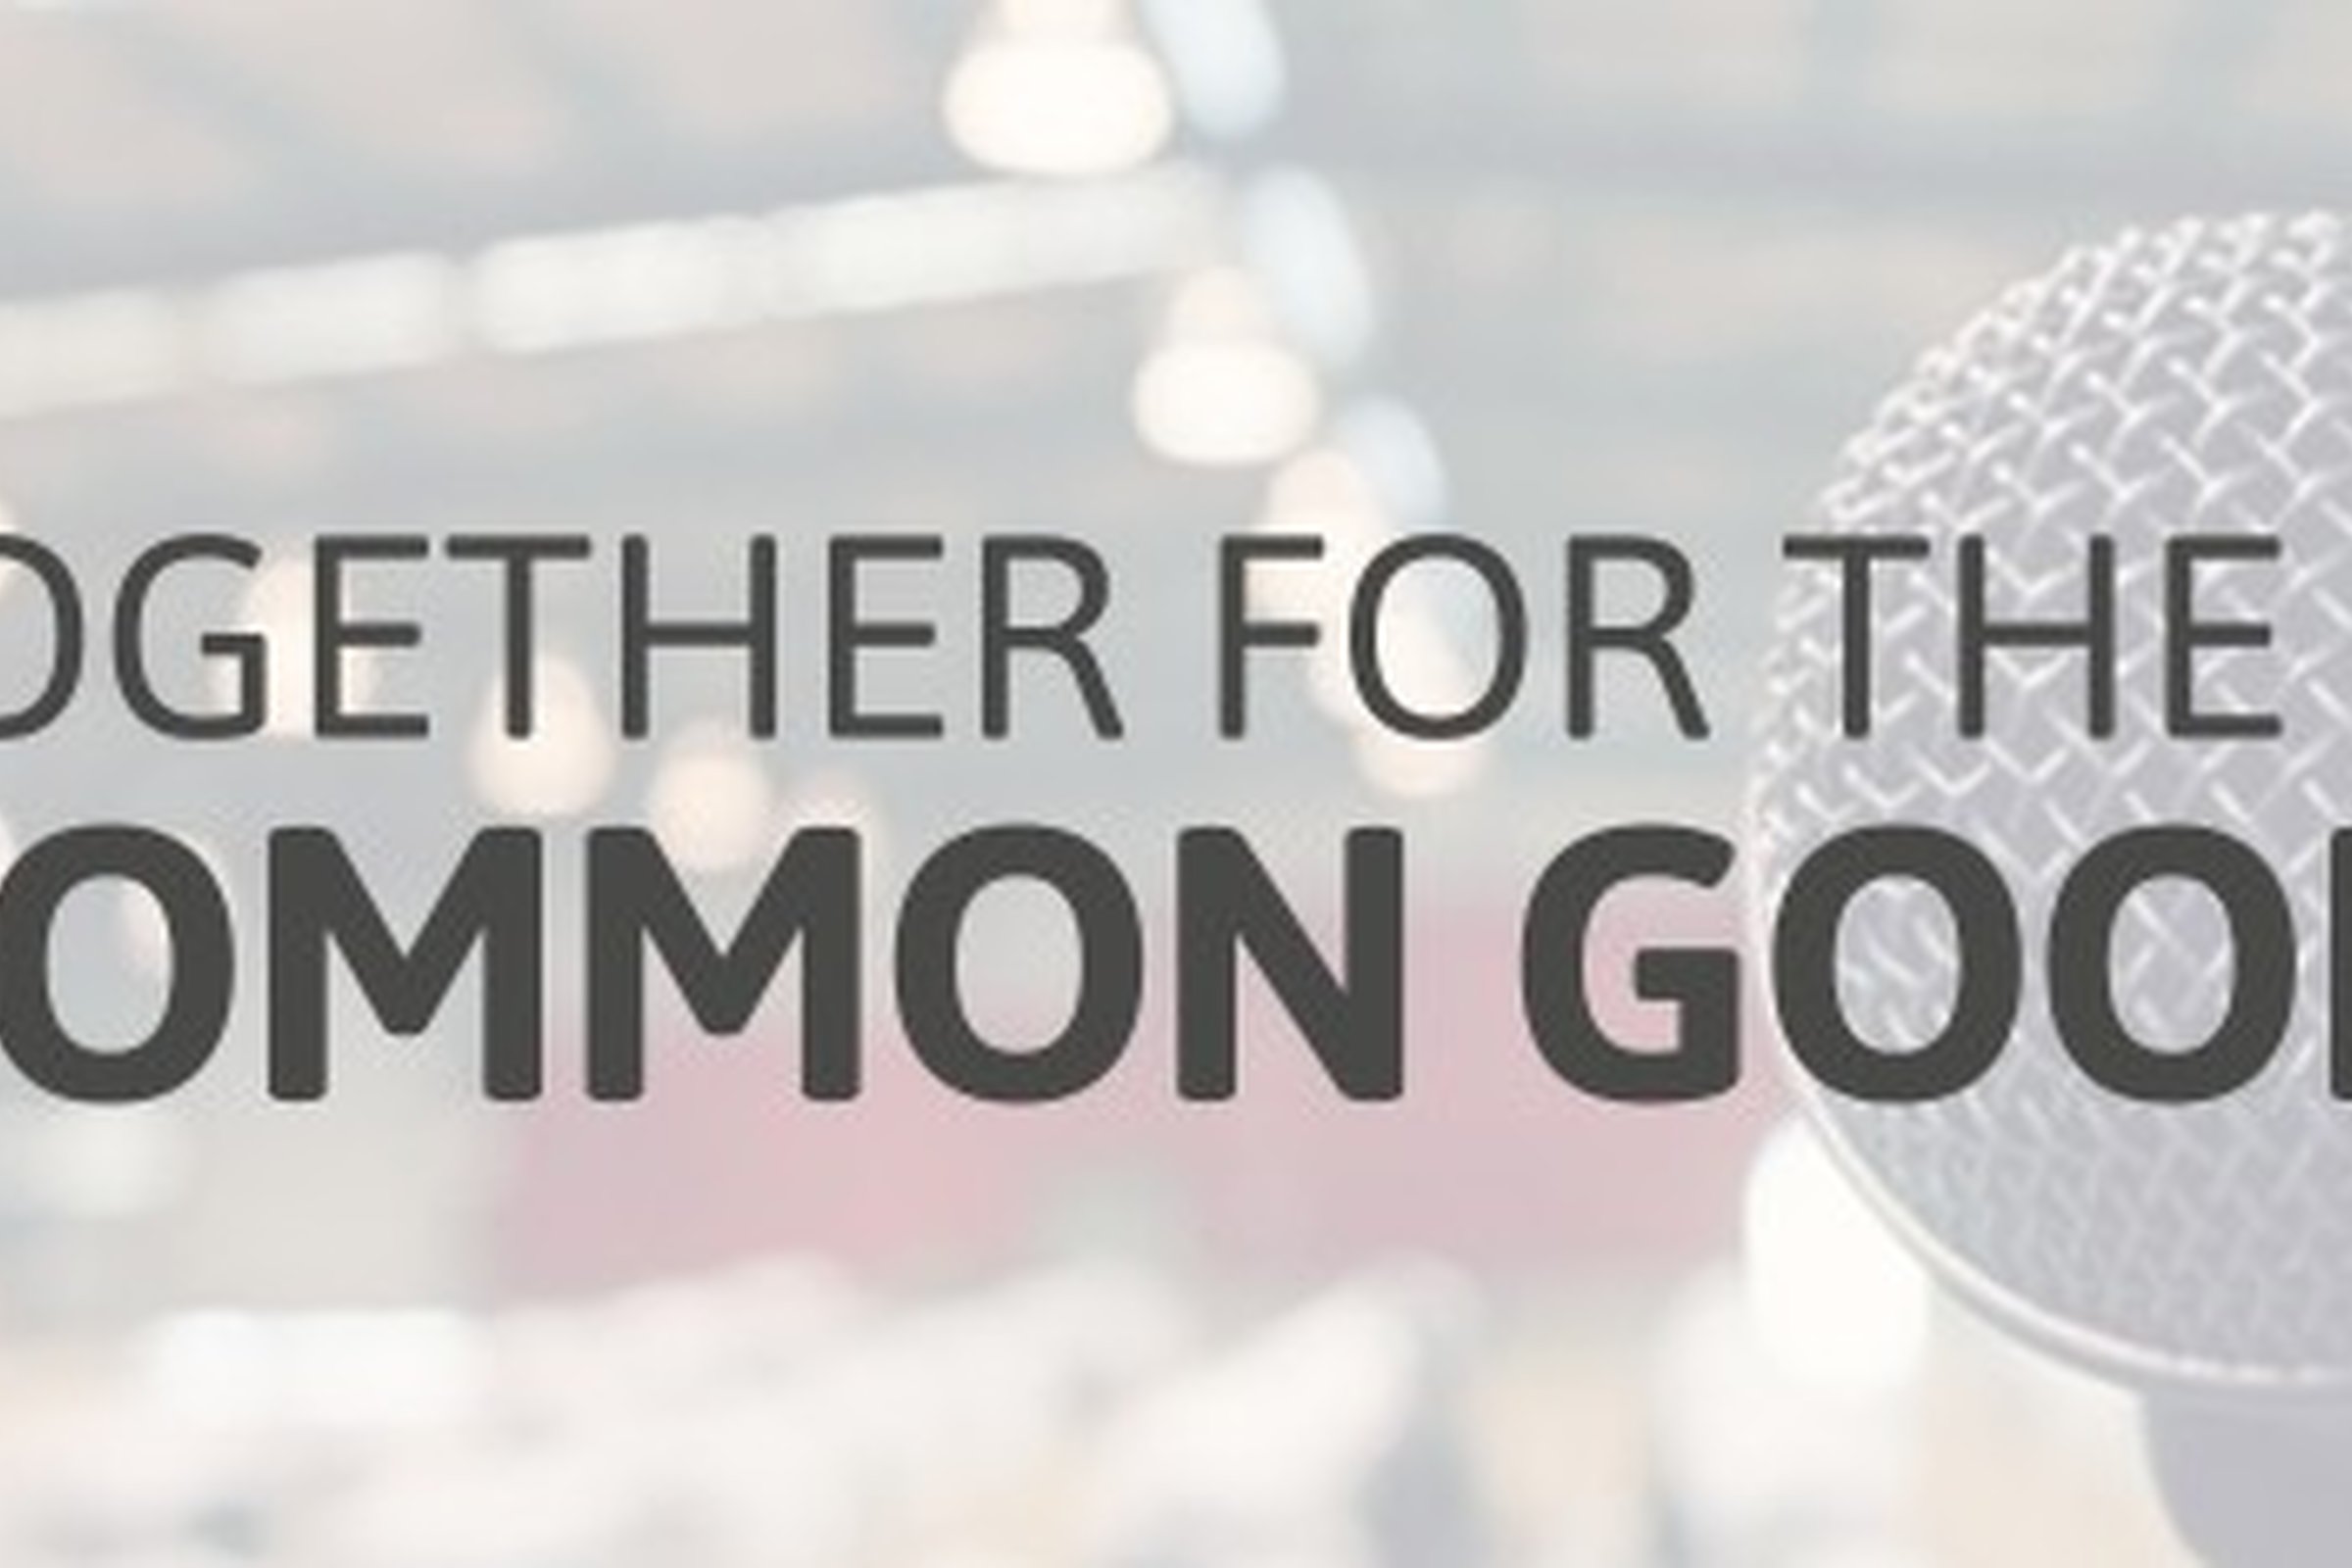 An Anglican Understanding of the Common Good